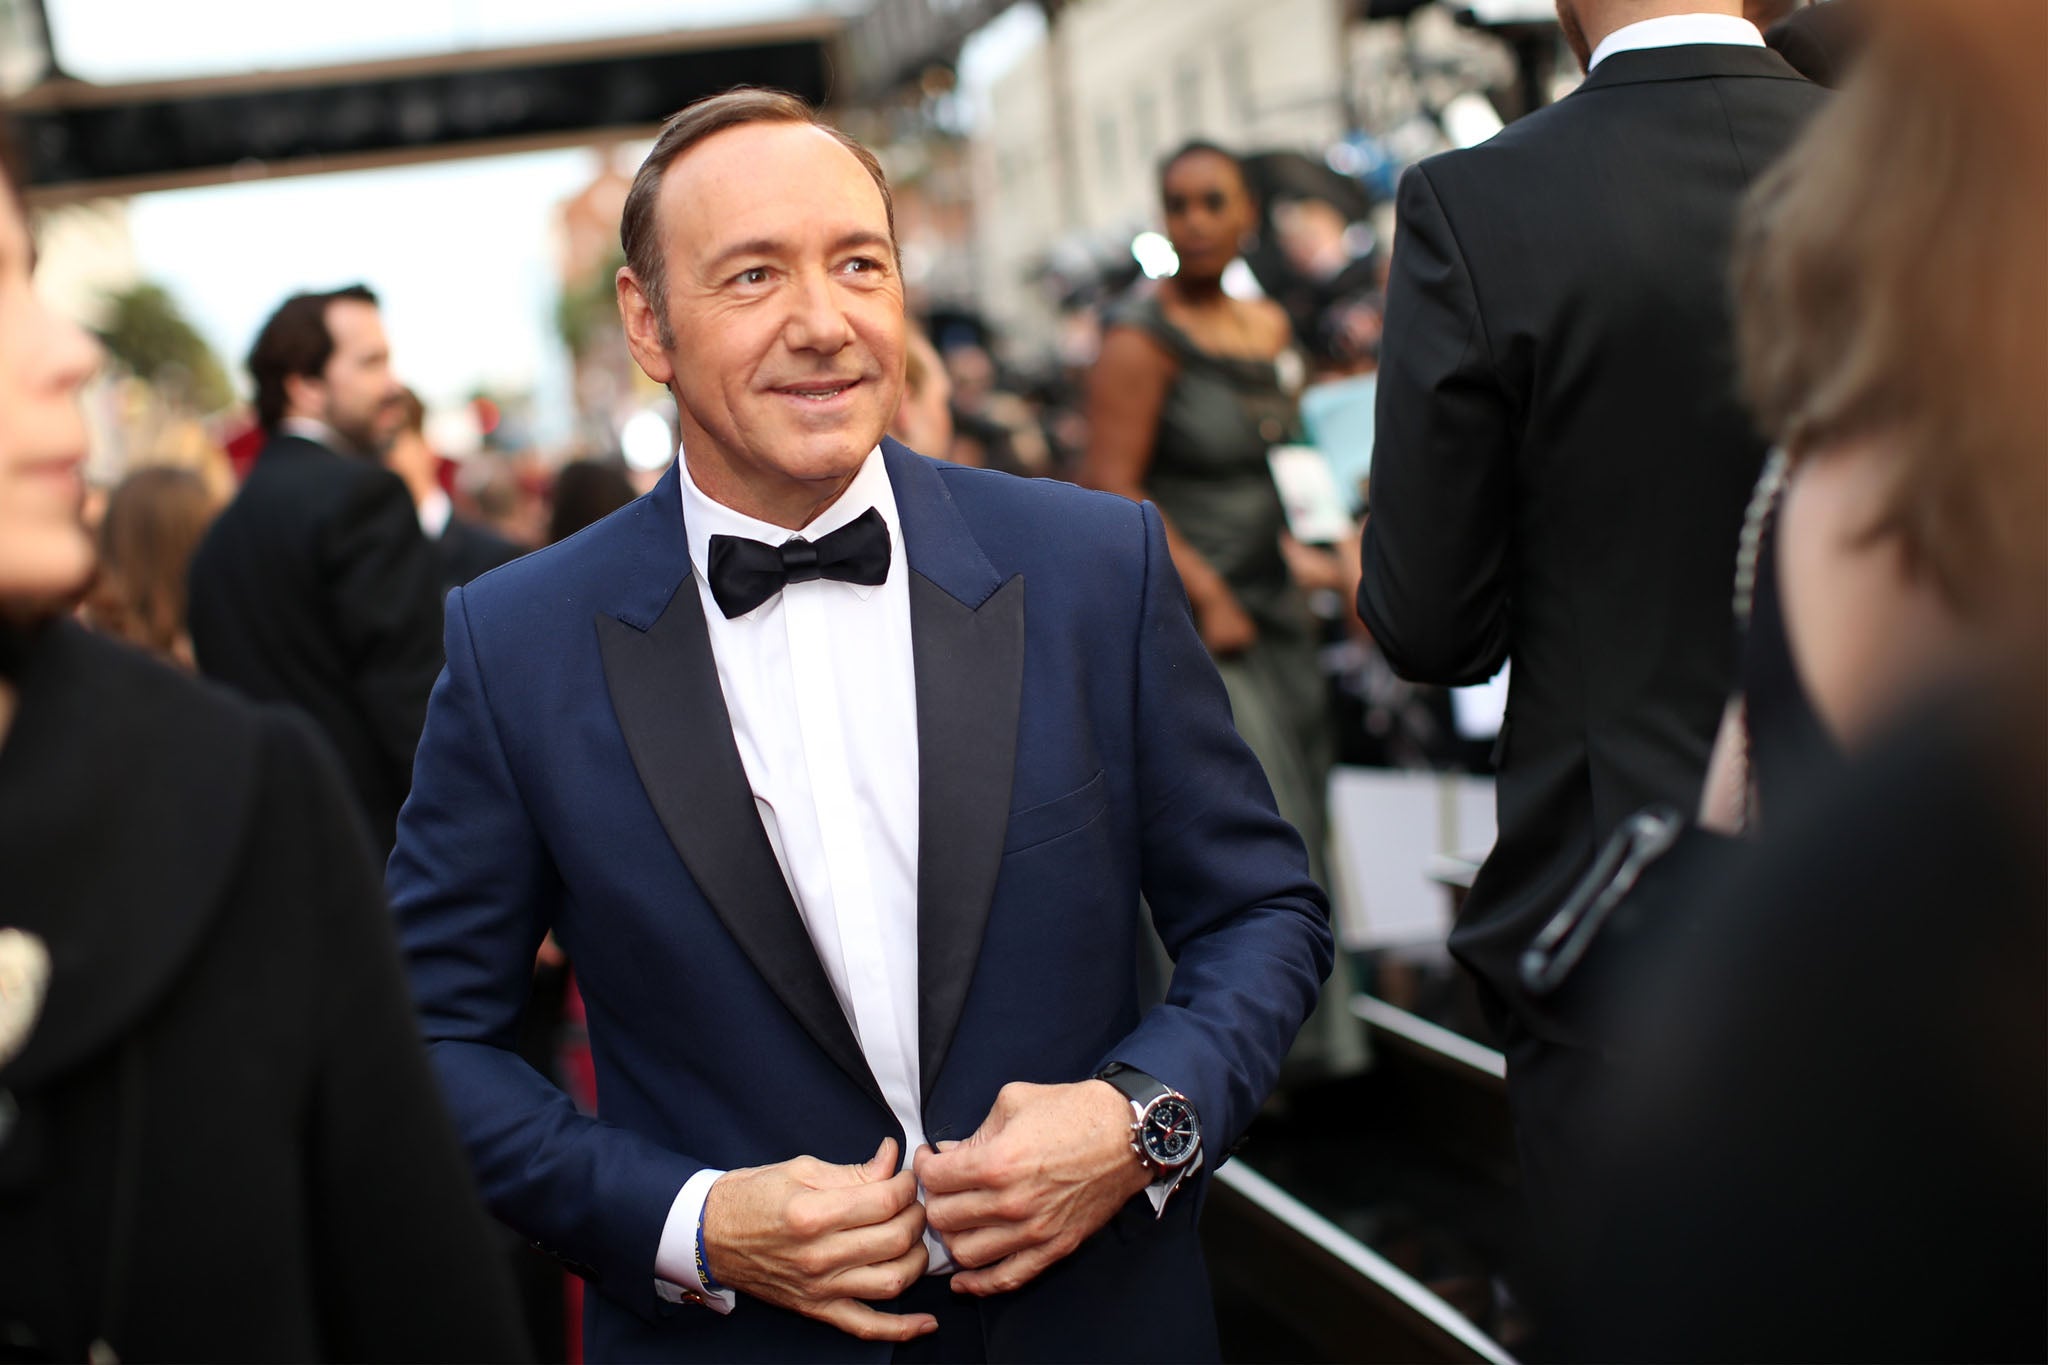 Kevin Spacey at the Academy Awards in 2014